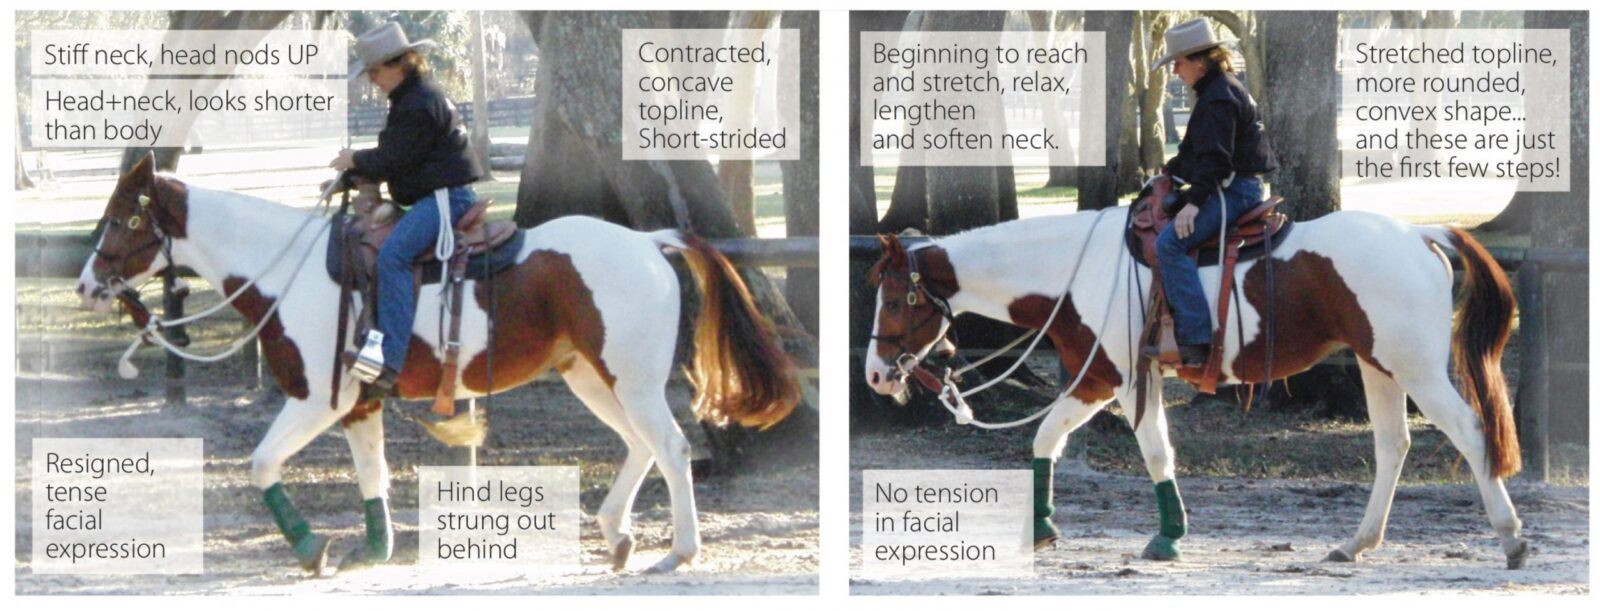 Good and Bad examples of a comfortable horse under saddle. Their bodies will tell you.